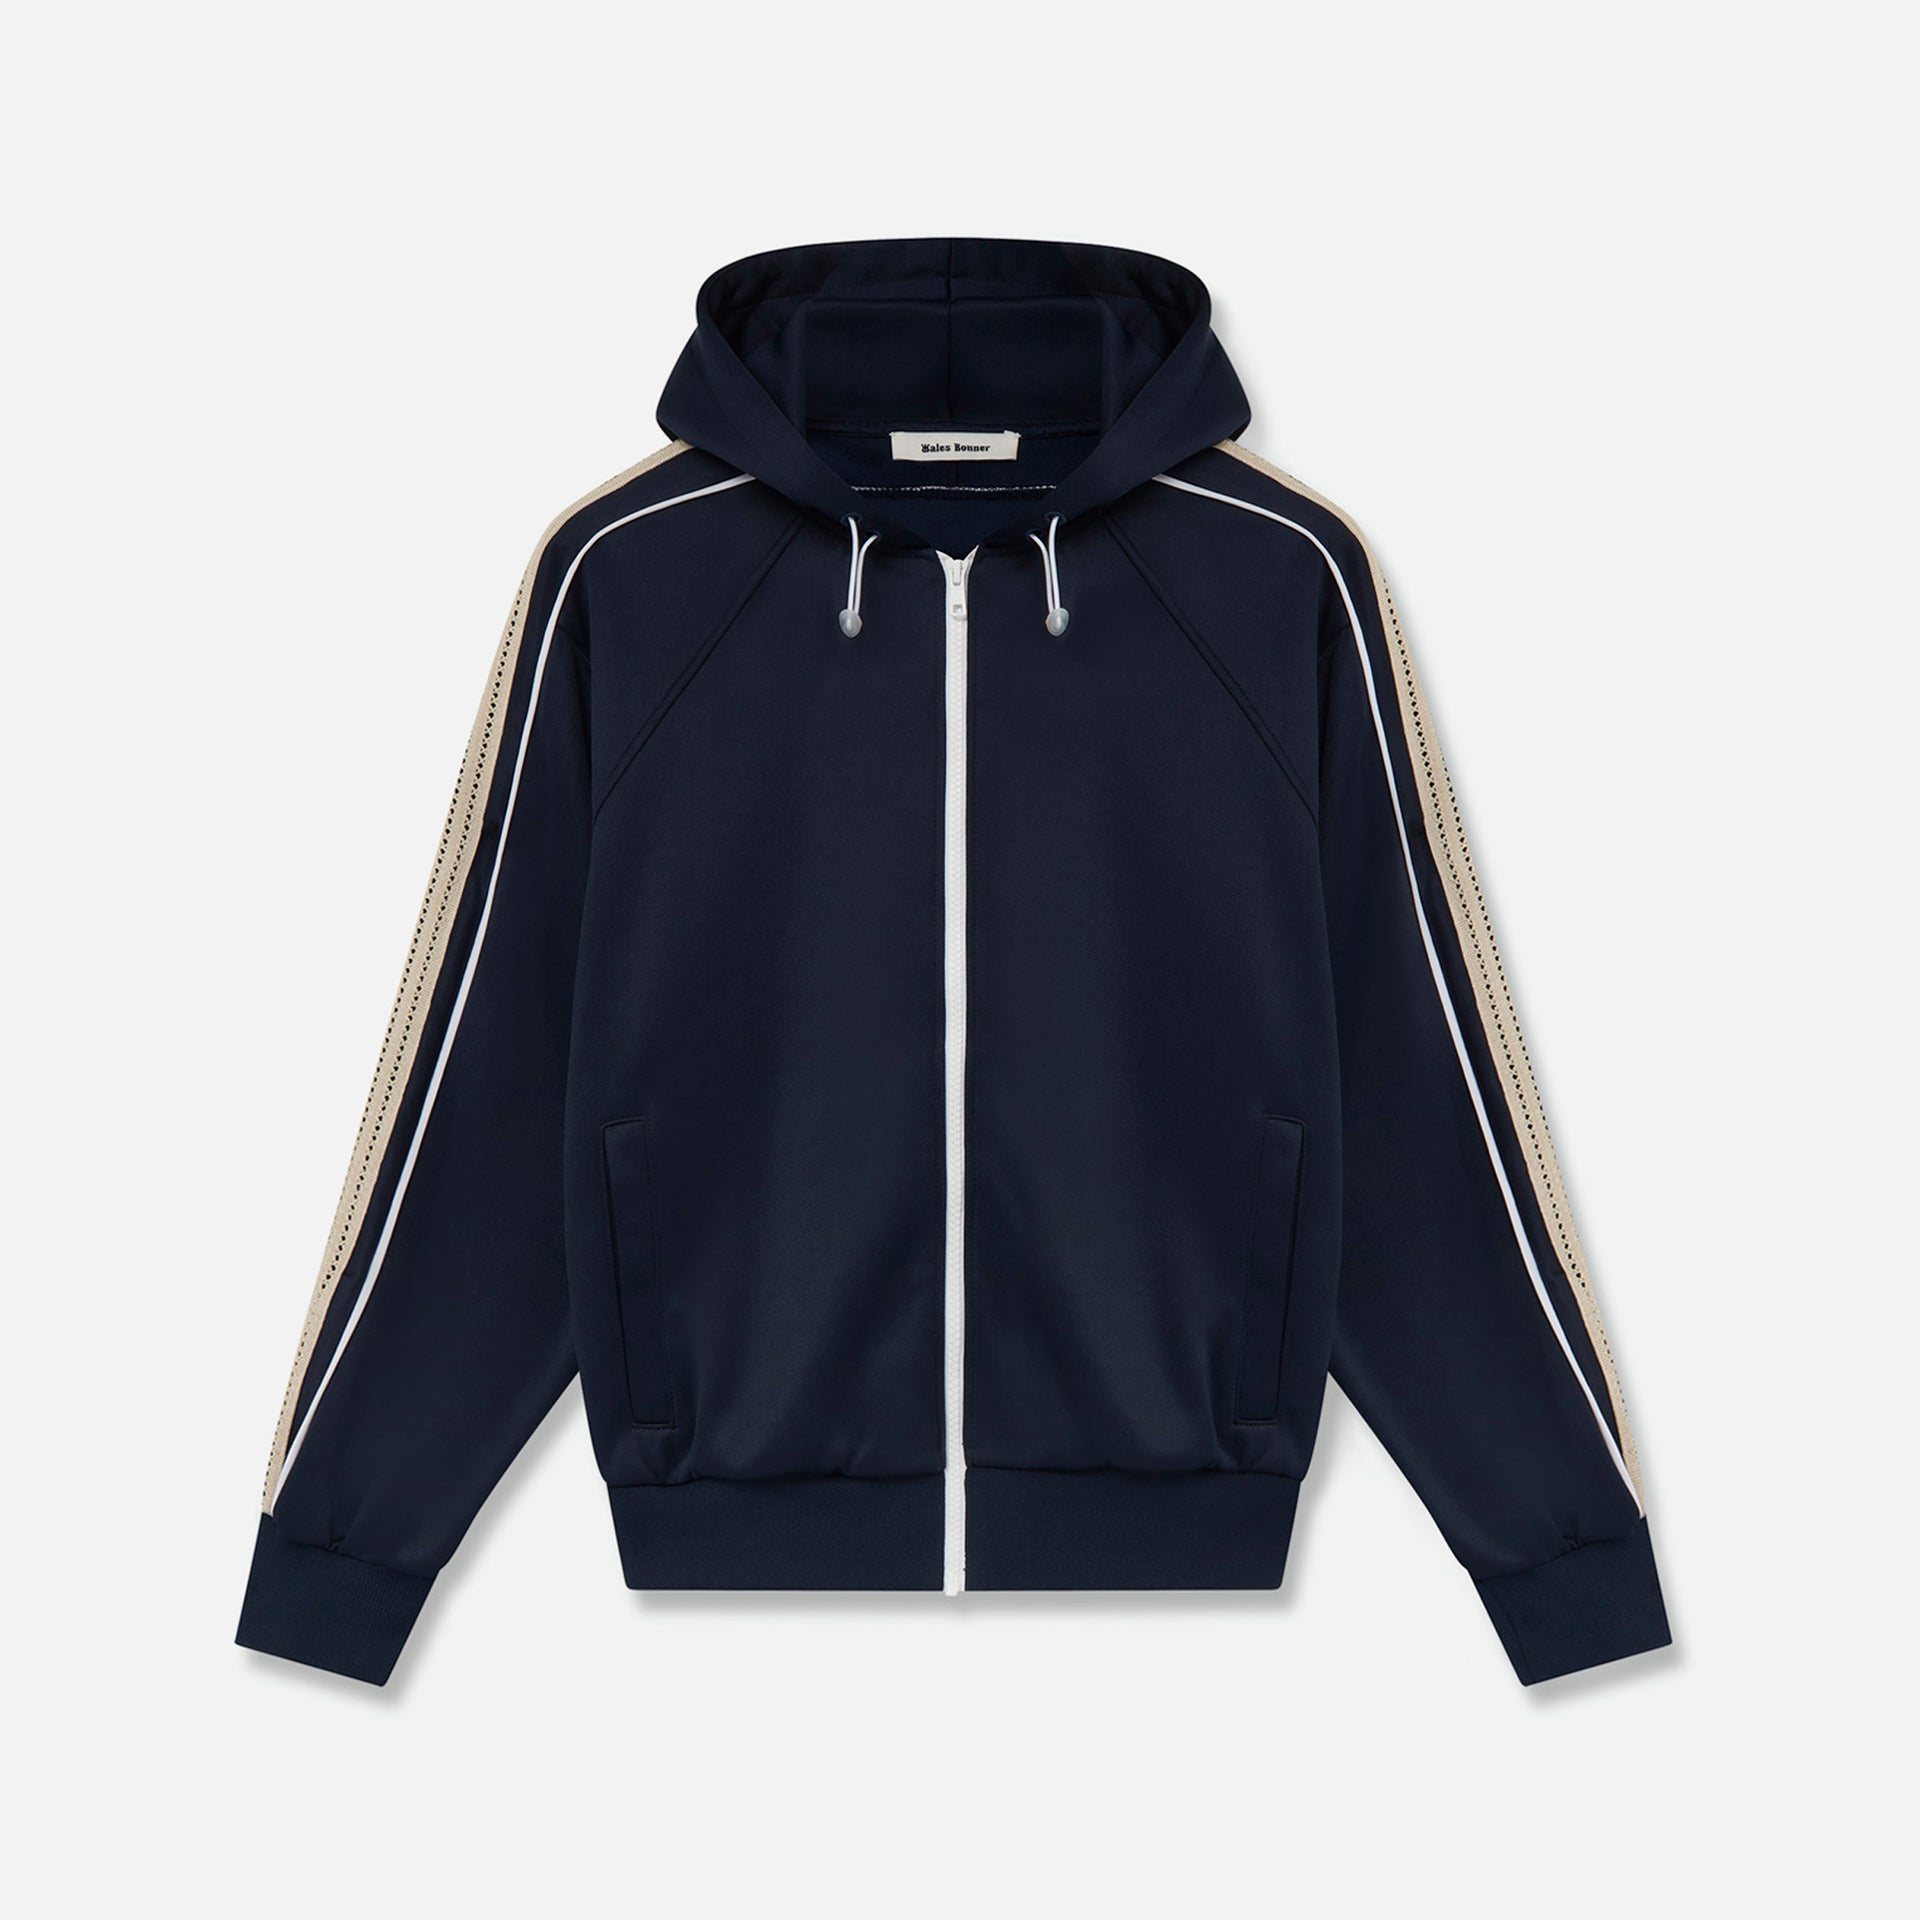 Wales Bonner Mantra button-up Hoodie - Navy